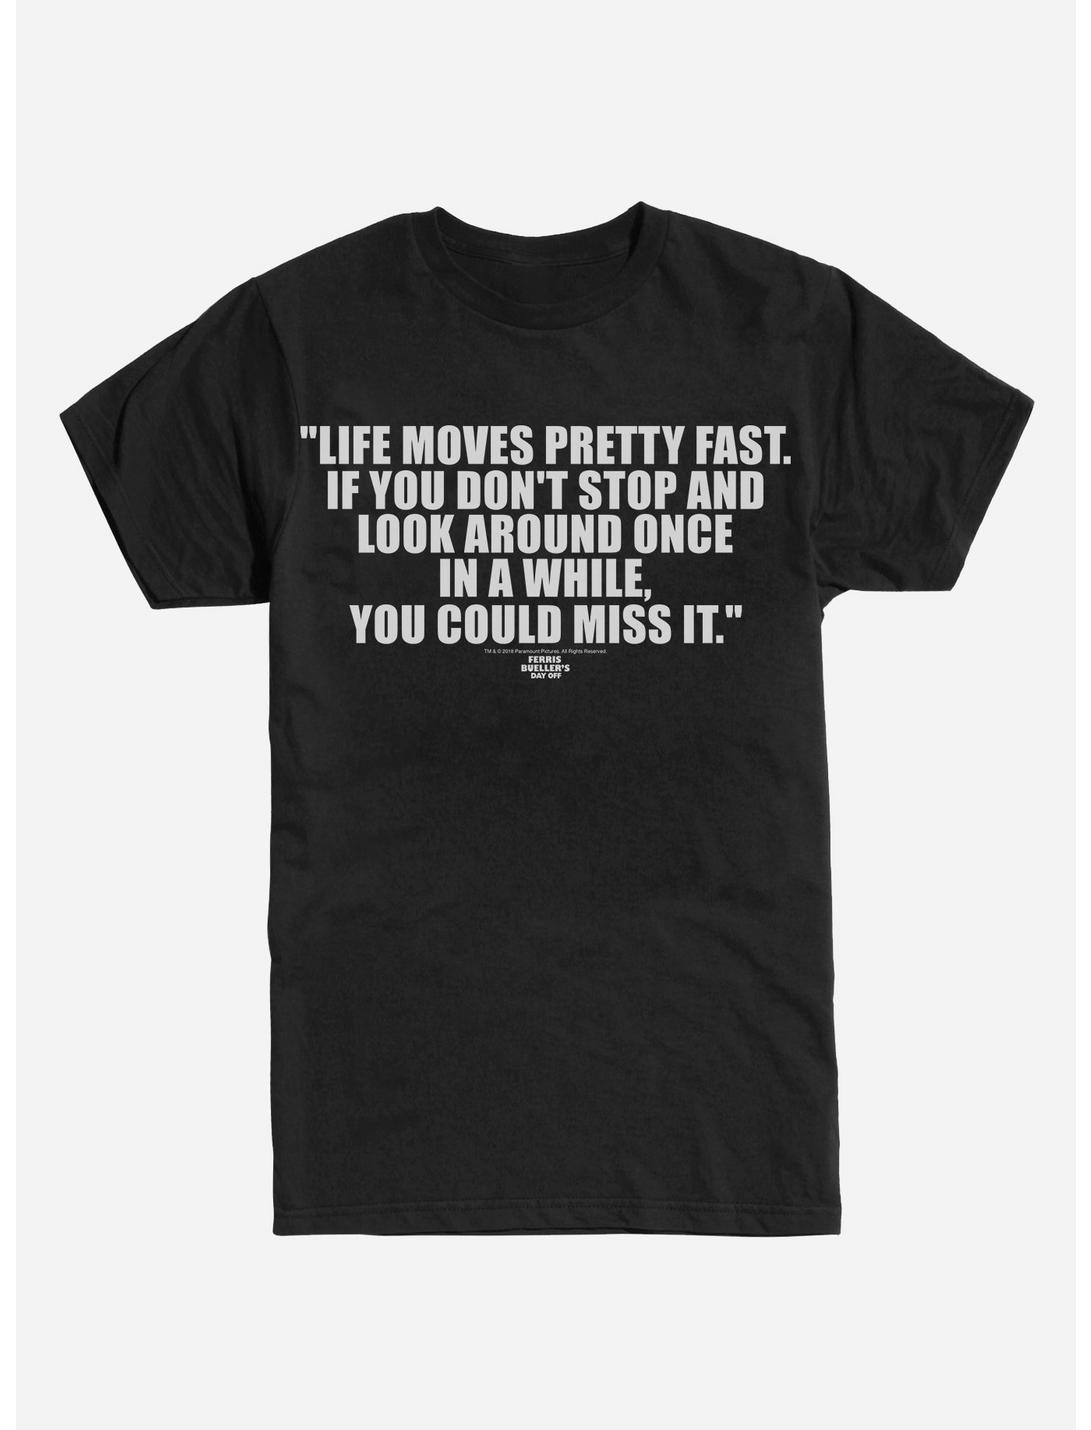 Ferris Bueller's Day Off Life Moves Pretty Fast Quote T-Shirt, BLACK, hi-res